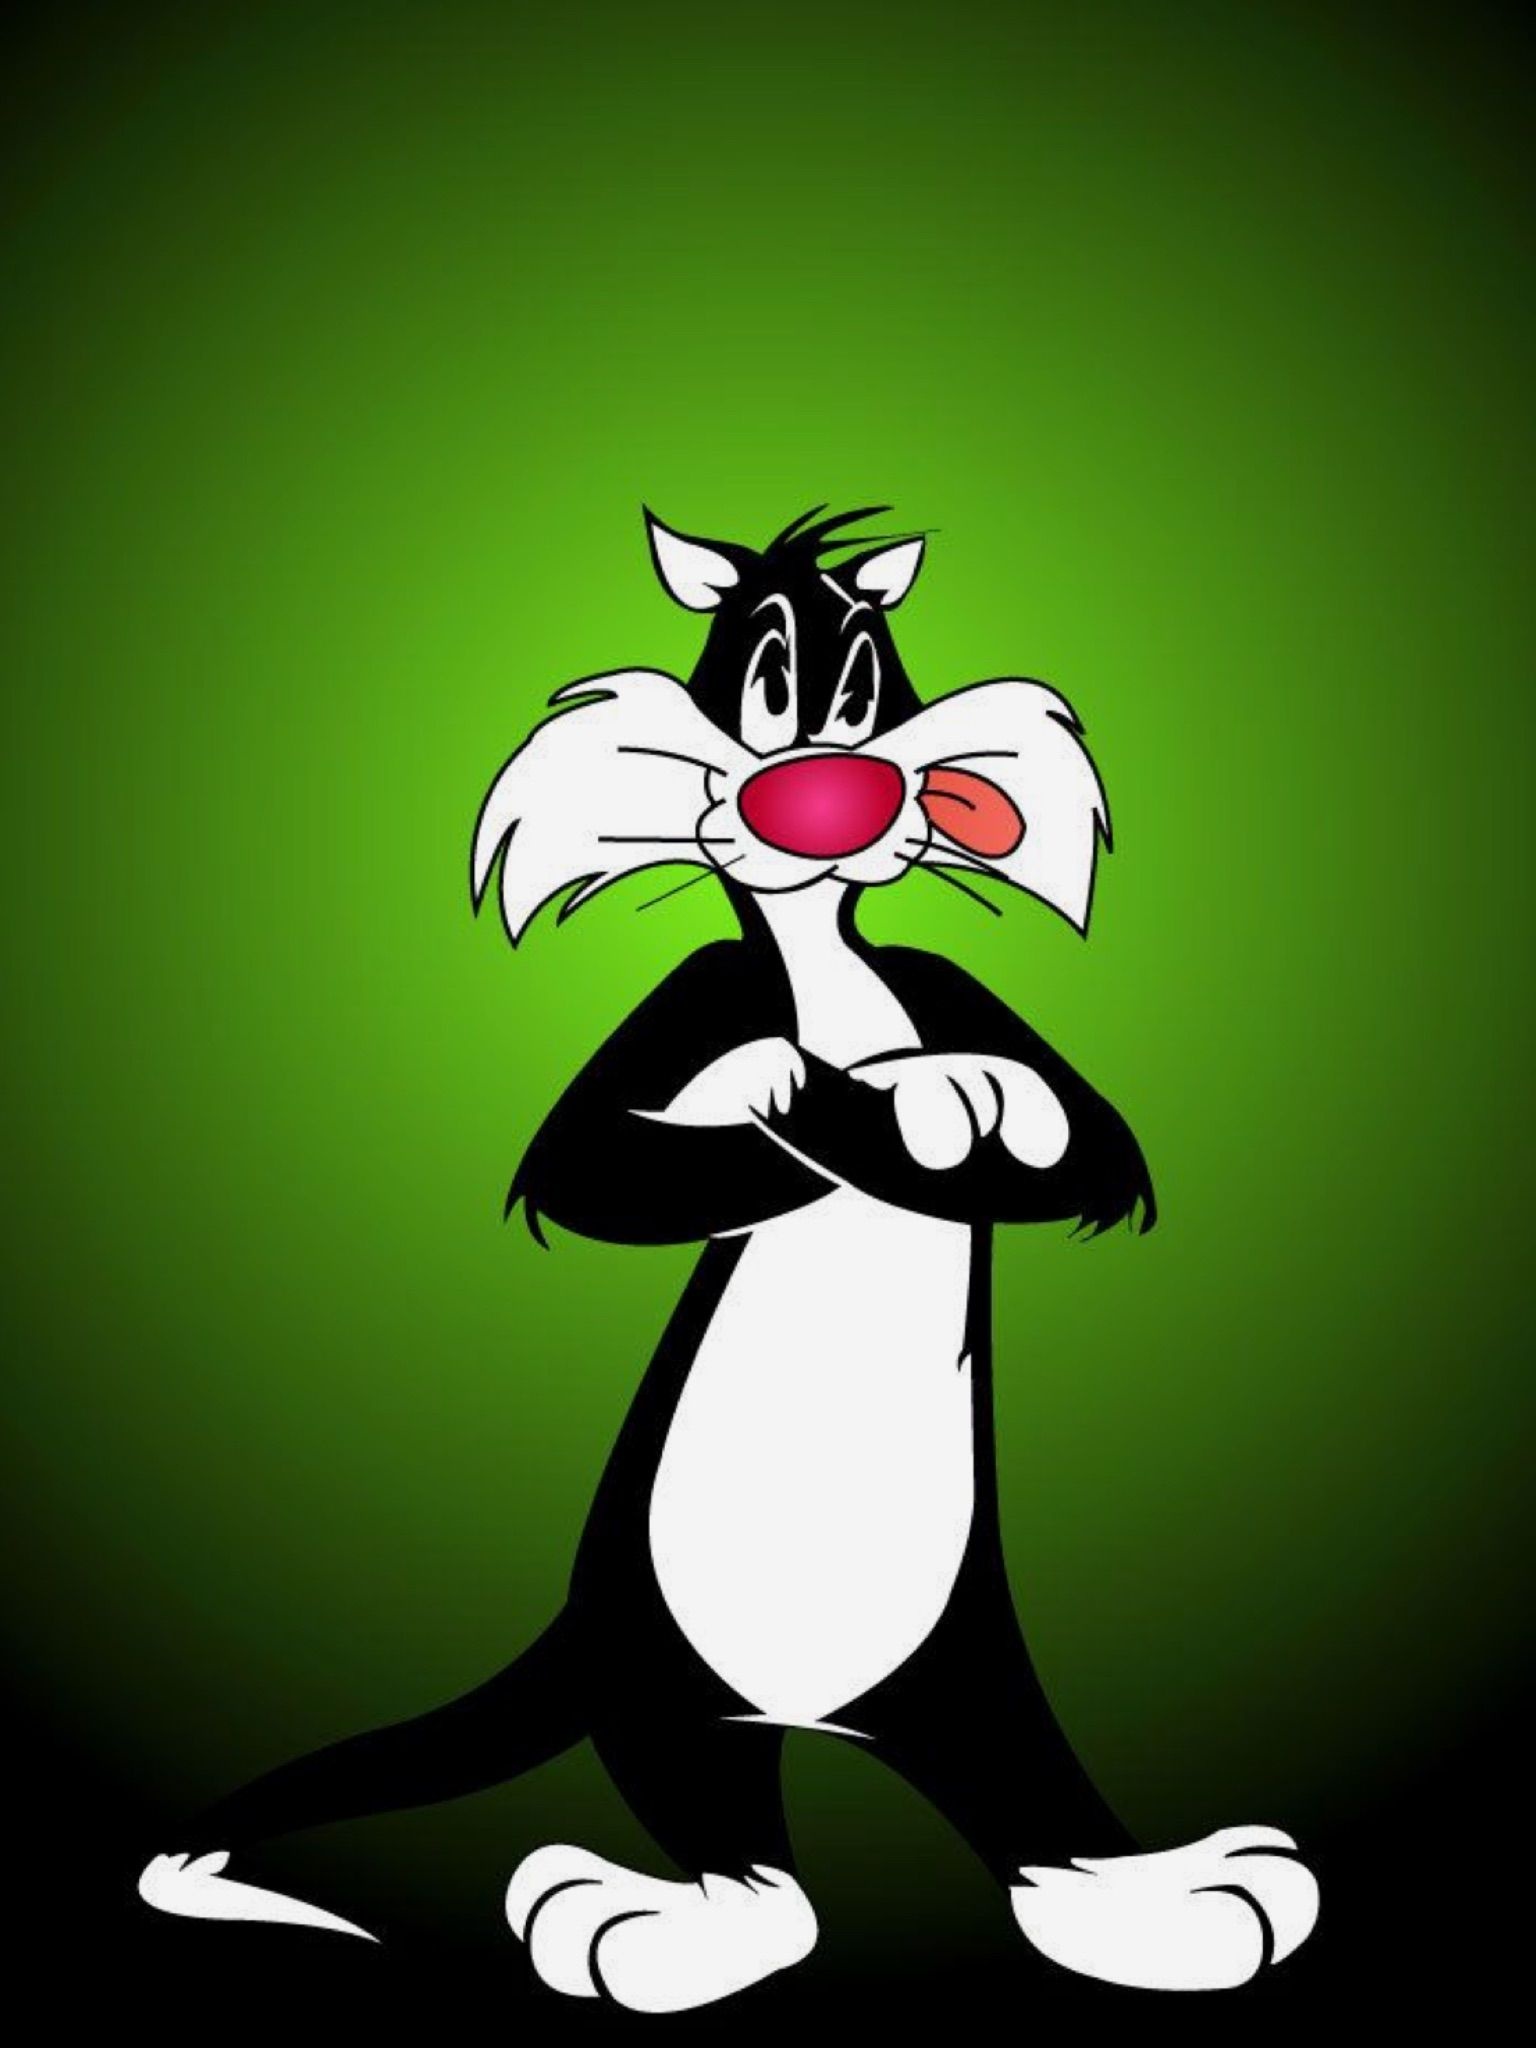 HD wallpaper, Classic Cartoons, Iphone Hd Sylvester The Cat Background Image, 1540X2050 Hd Phone, Looney Tunes Cartoon